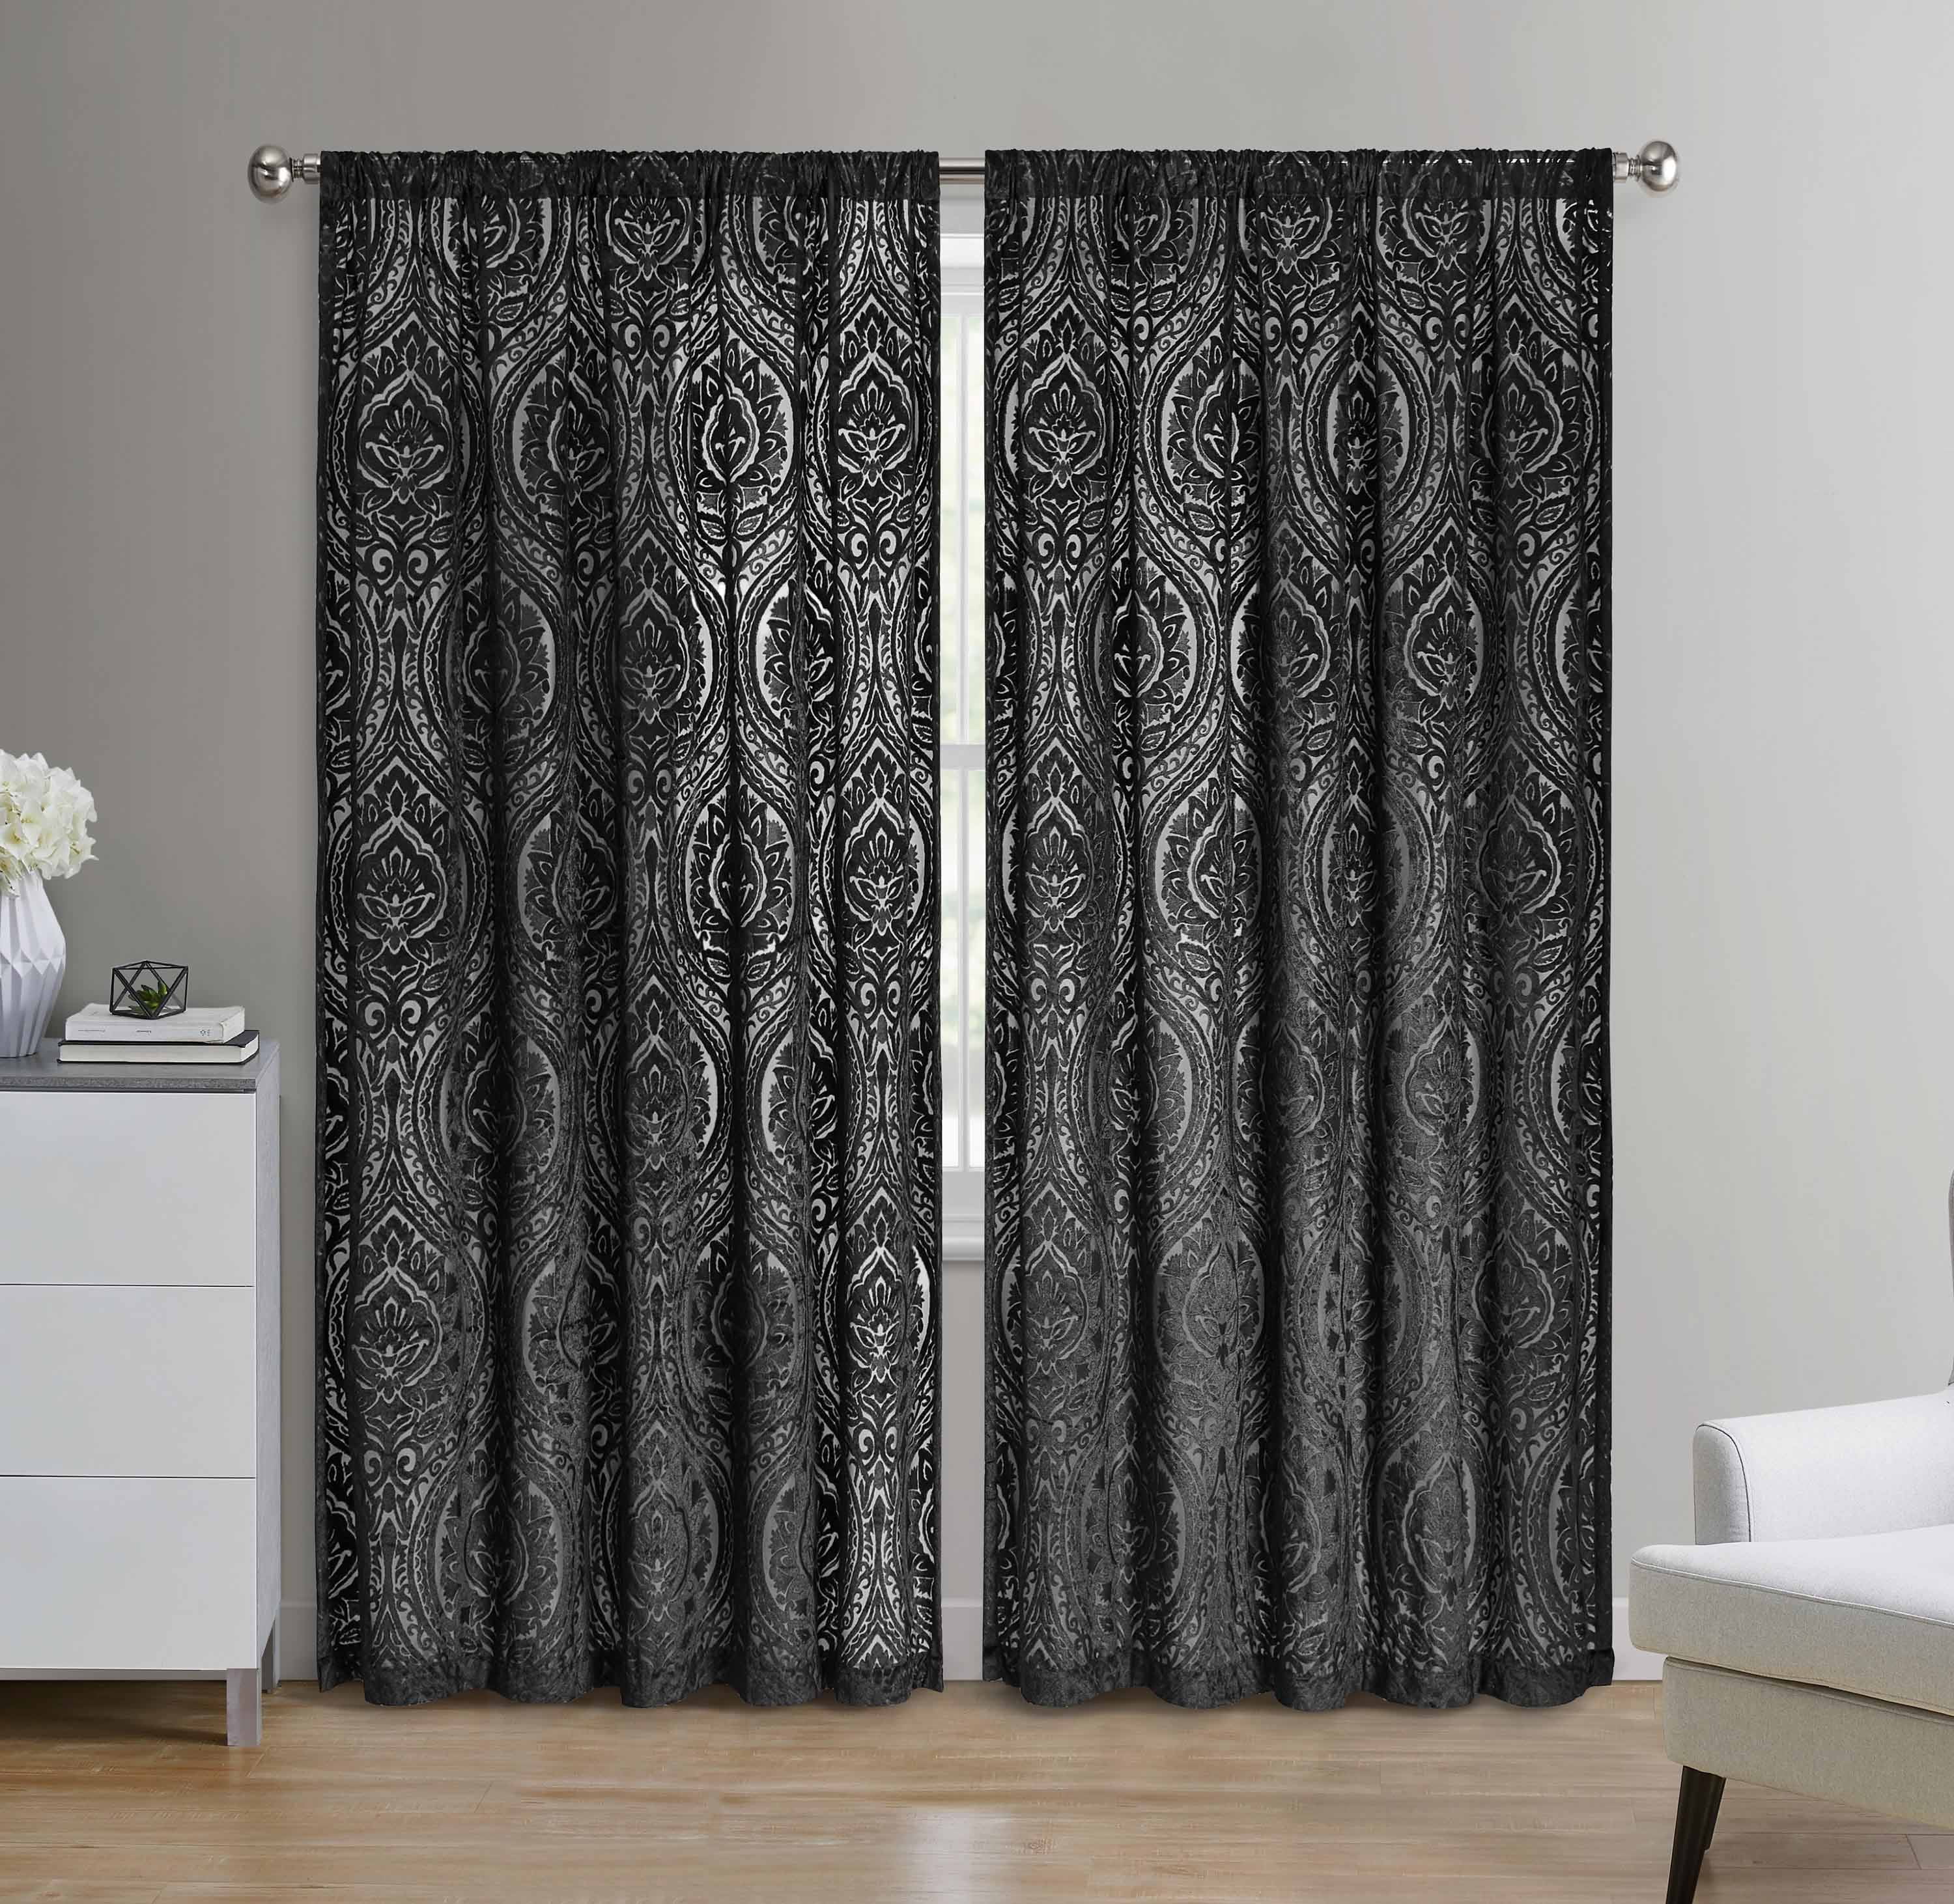 Details about   Black 84 inch Long Fire Rated/Treated Velvet Curtain Panel w/Rod Pocket Drape 